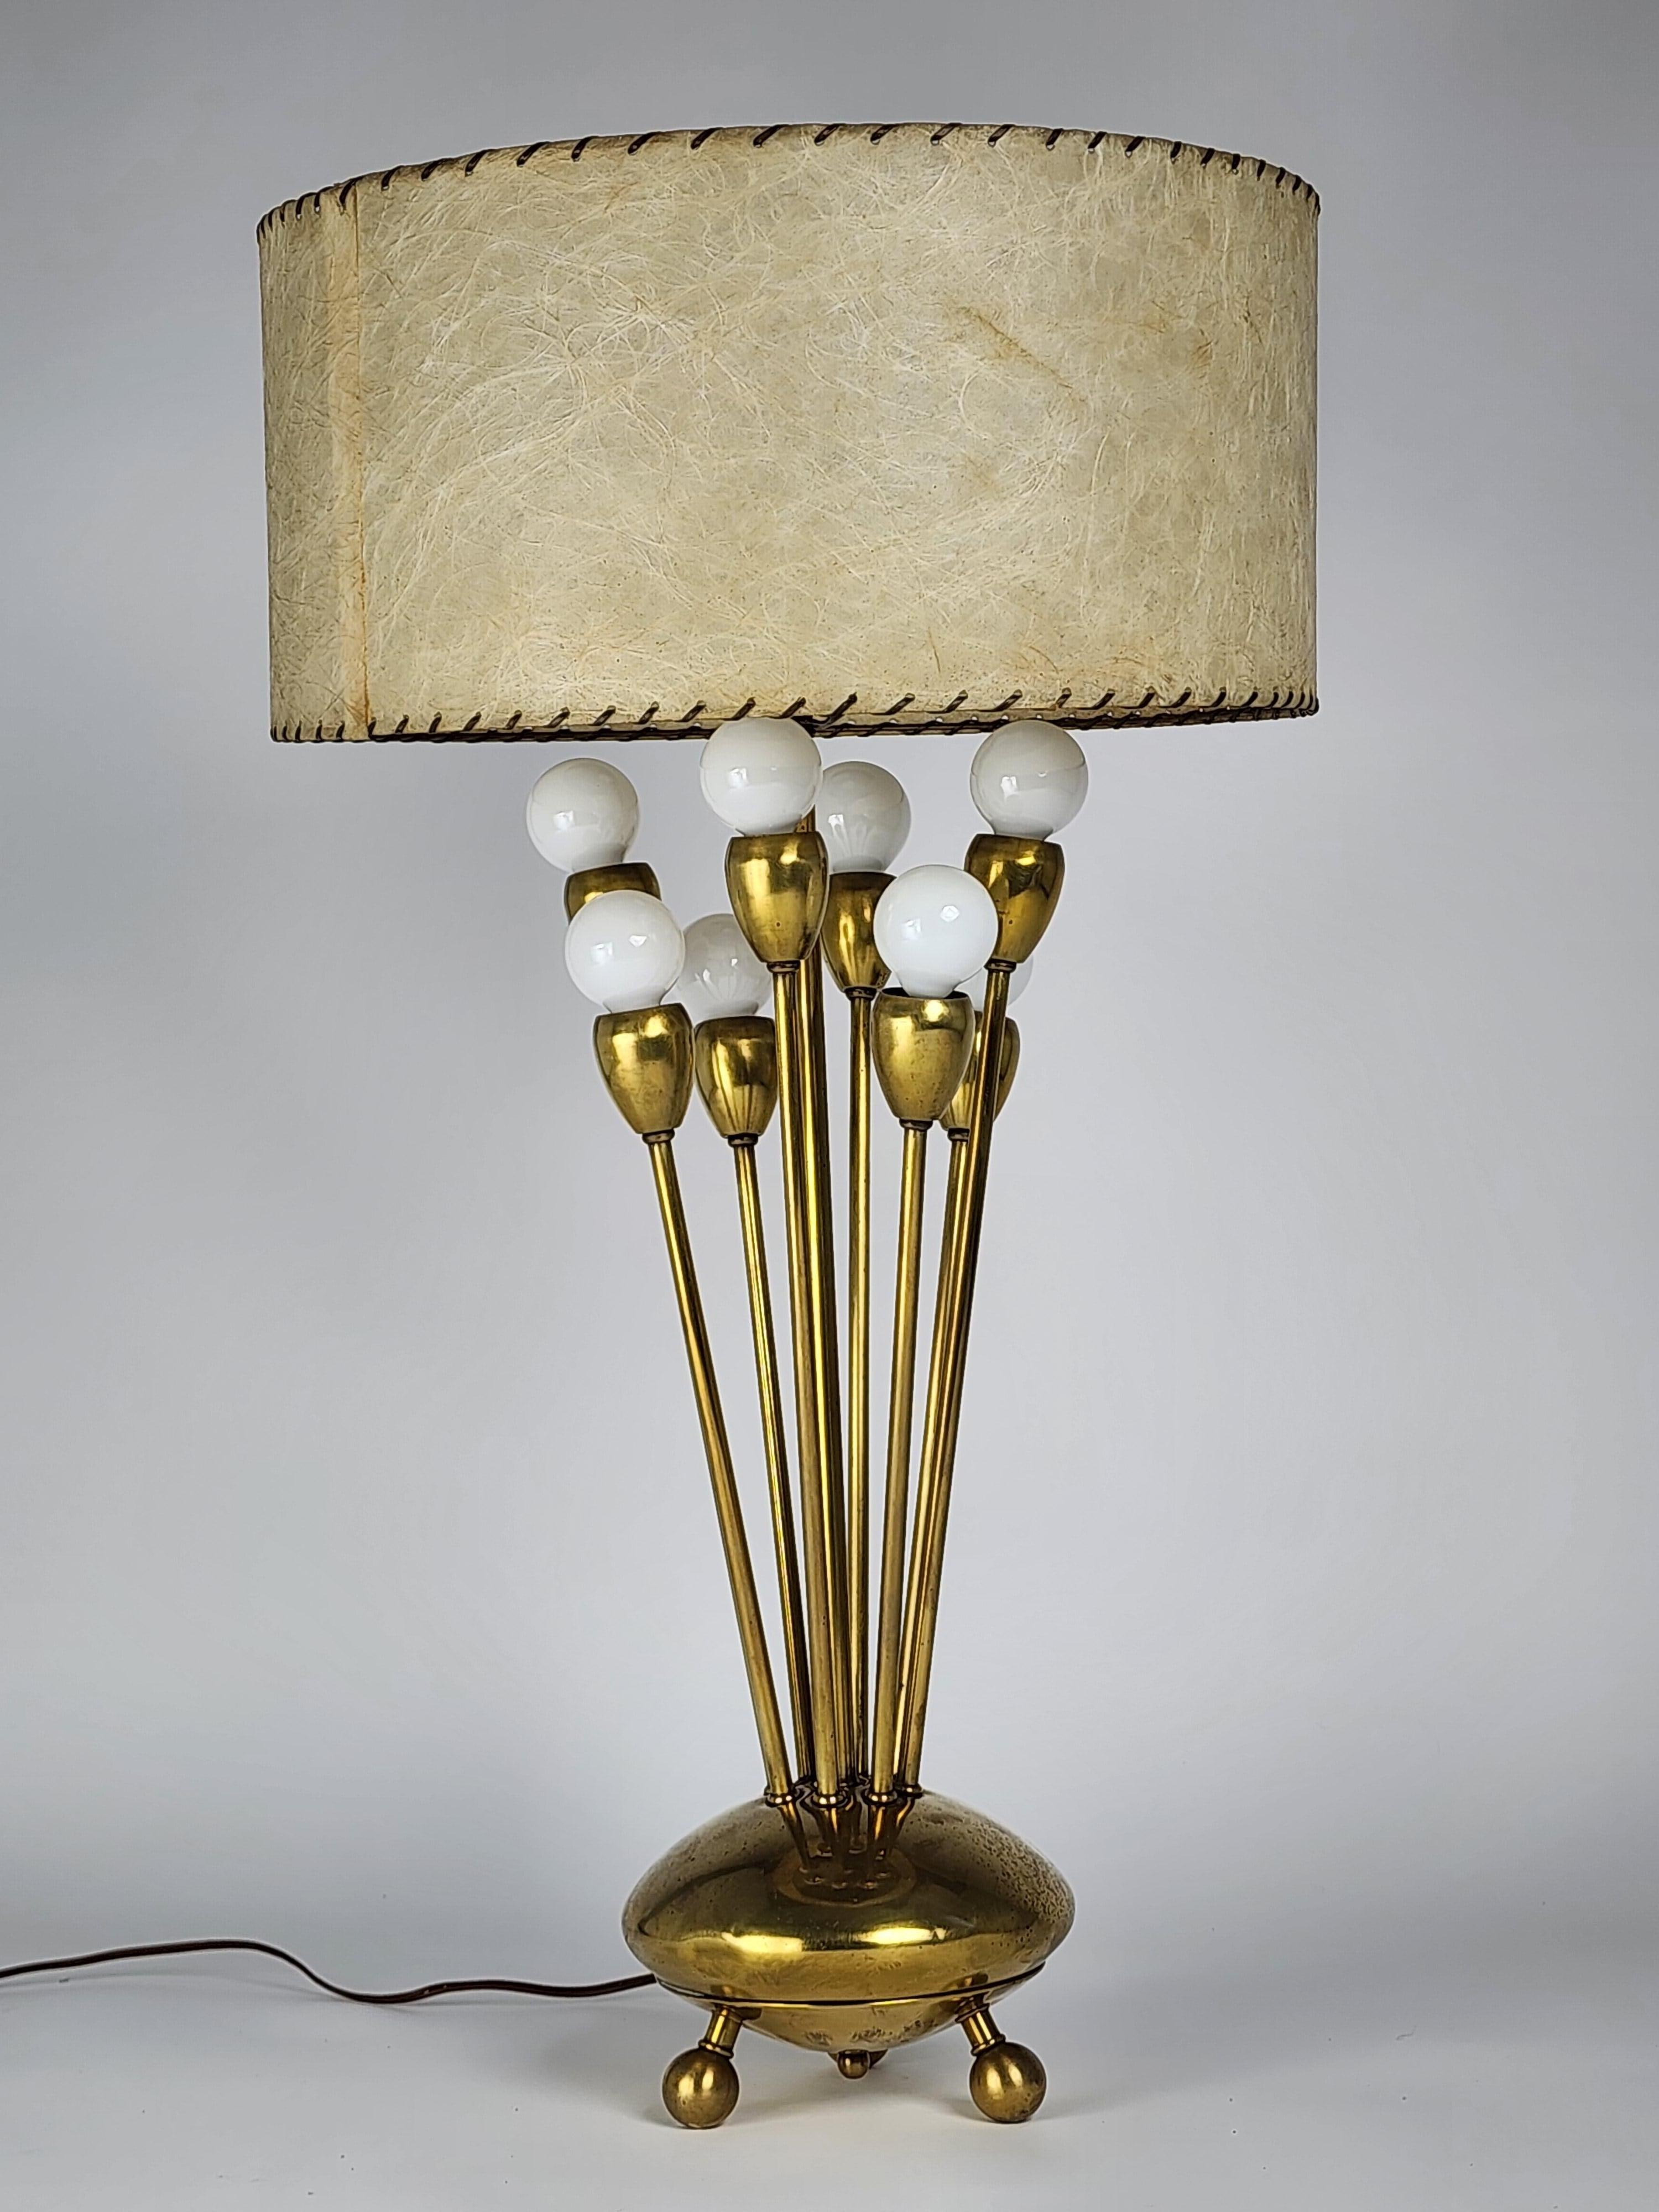 Bold 1950s Sputnik brass table lamp with 9 arm from Majestic Lamp Corp. USA 

Well made. Solid sturdy construction. 

Rotating on/off switch on base control different light configuration on 8 arm. 

8 E12 candelabra Size socket rated at 25 watt.